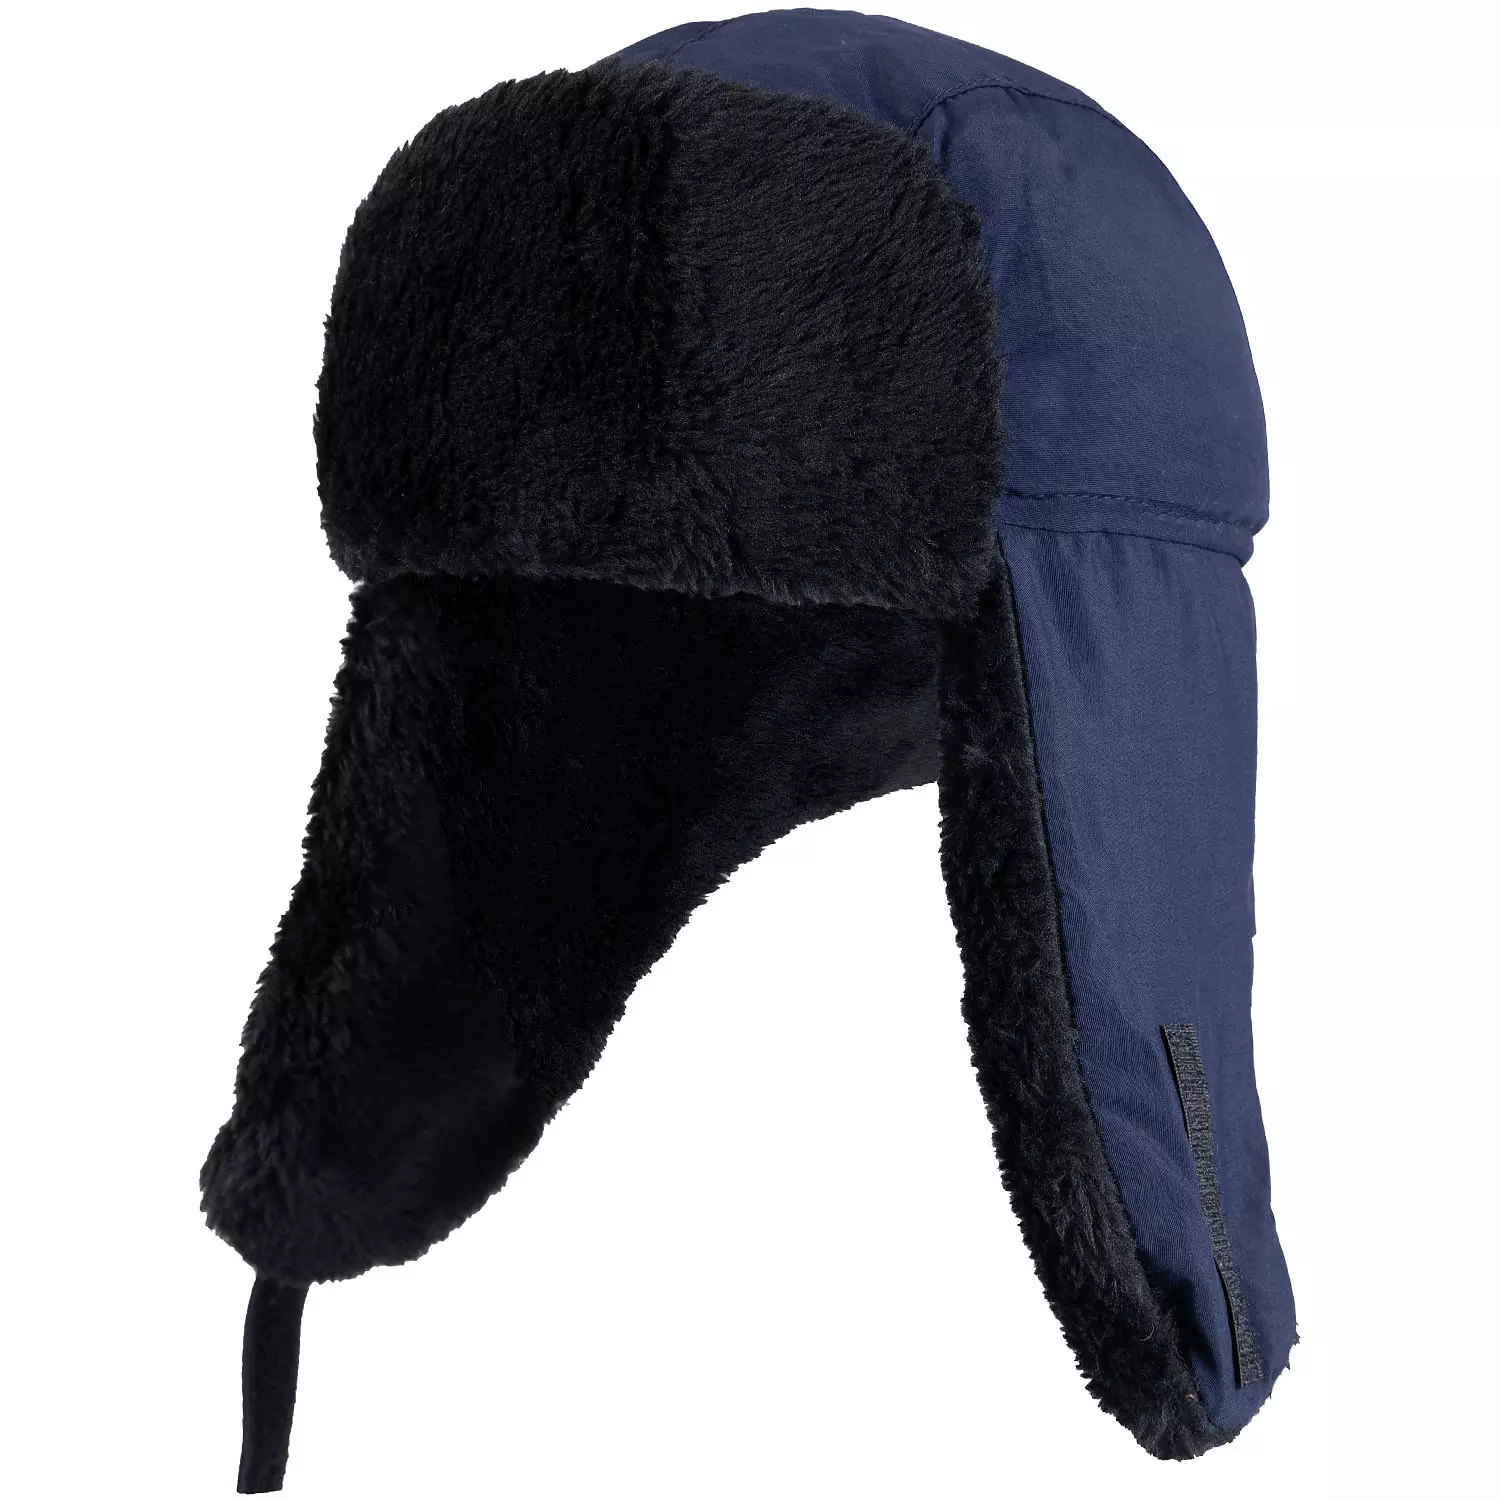 Nylon aviator hat with faux fur lining & trims, navy